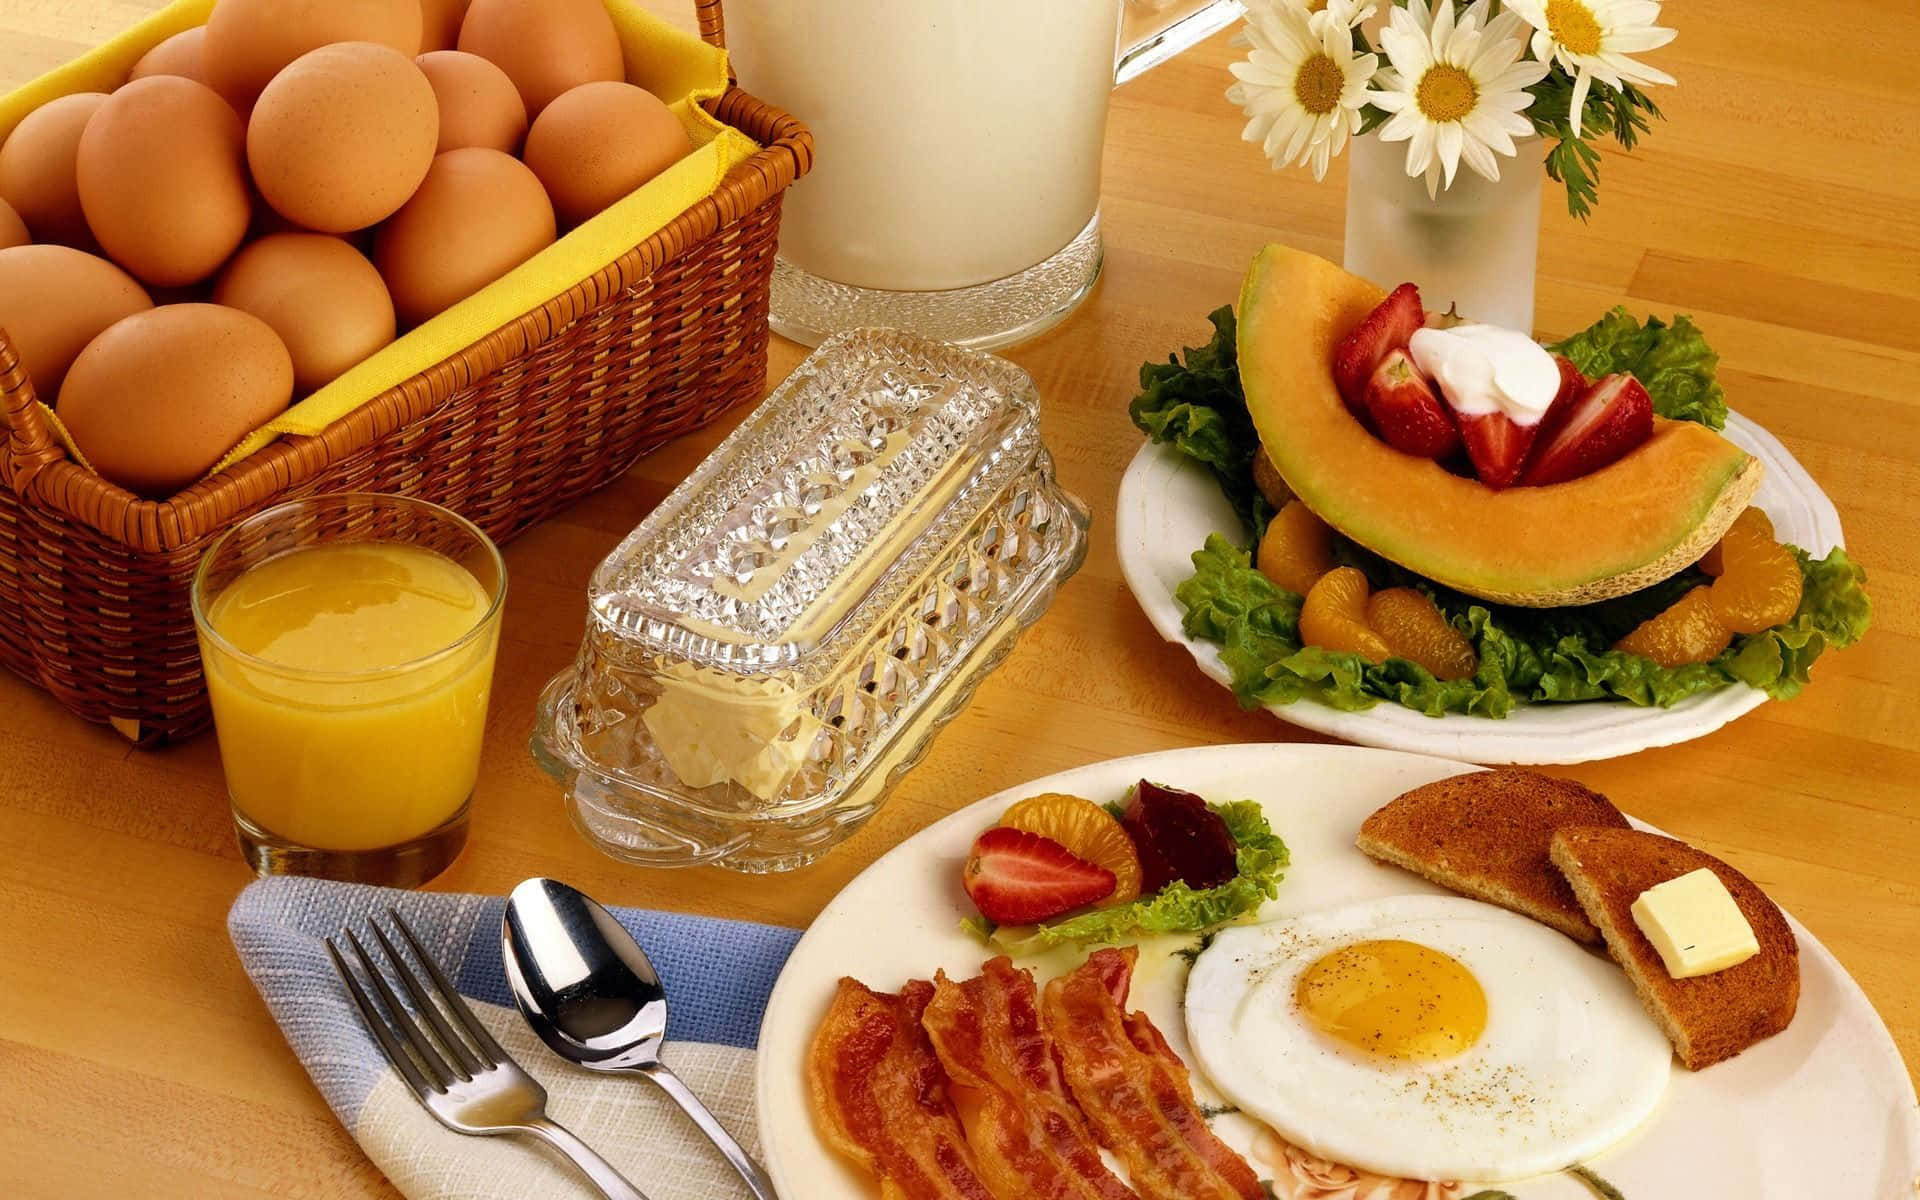 Breakfast Delight: A table with a variety of morning refreshments